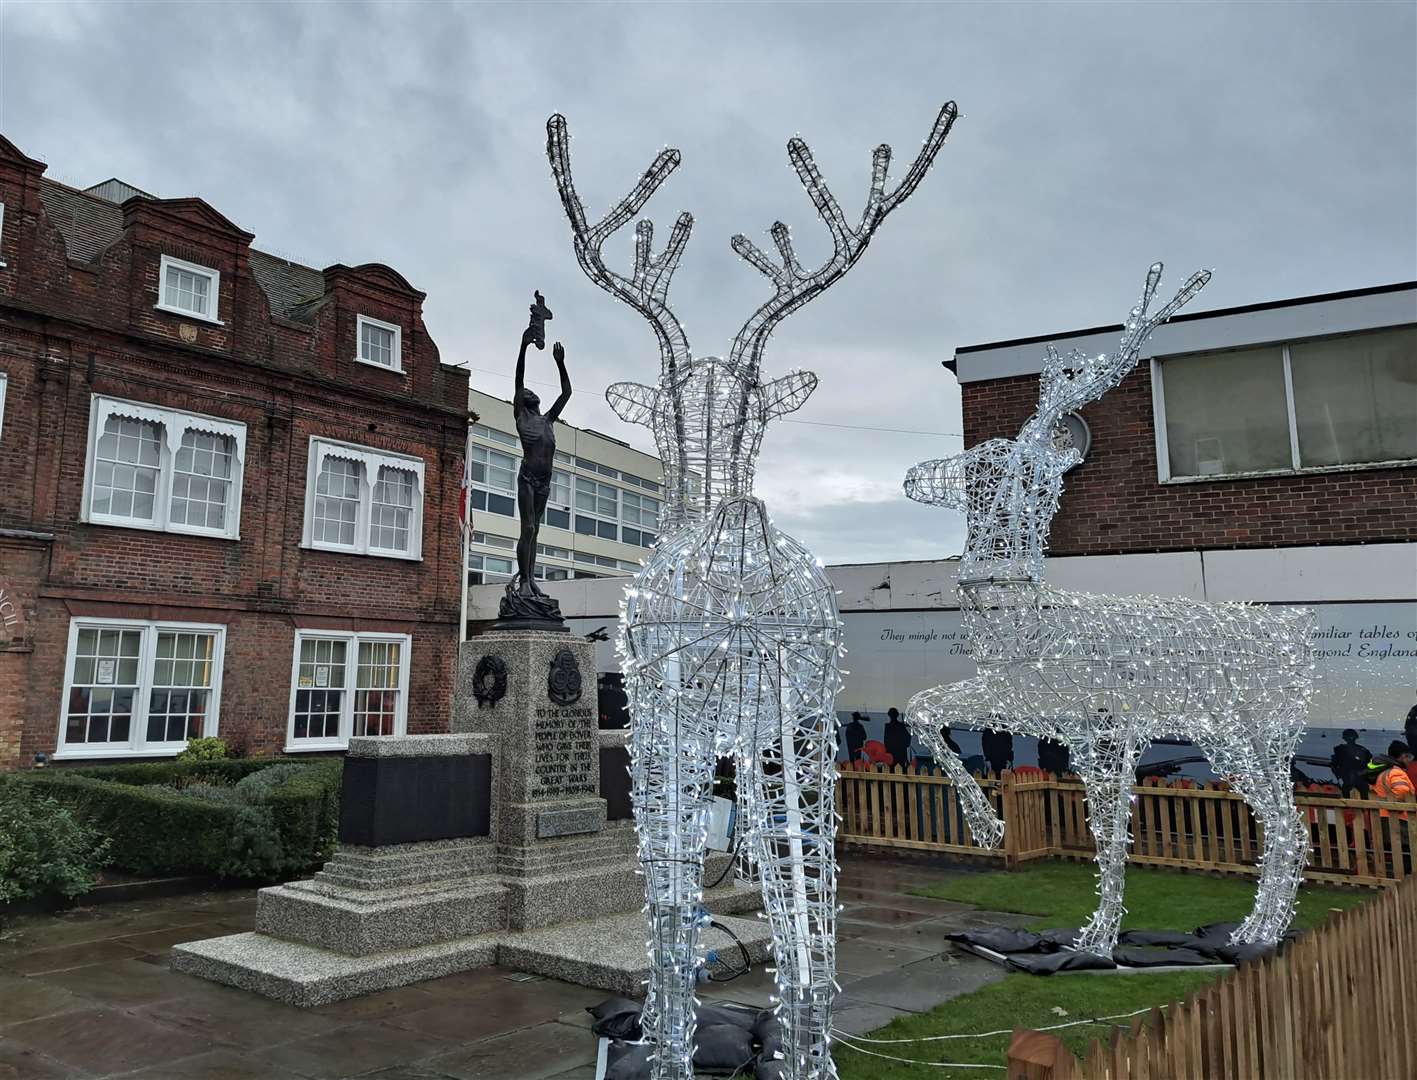 The reindeer sculptures at Dover War Memorial with their backs turned to passers-bys